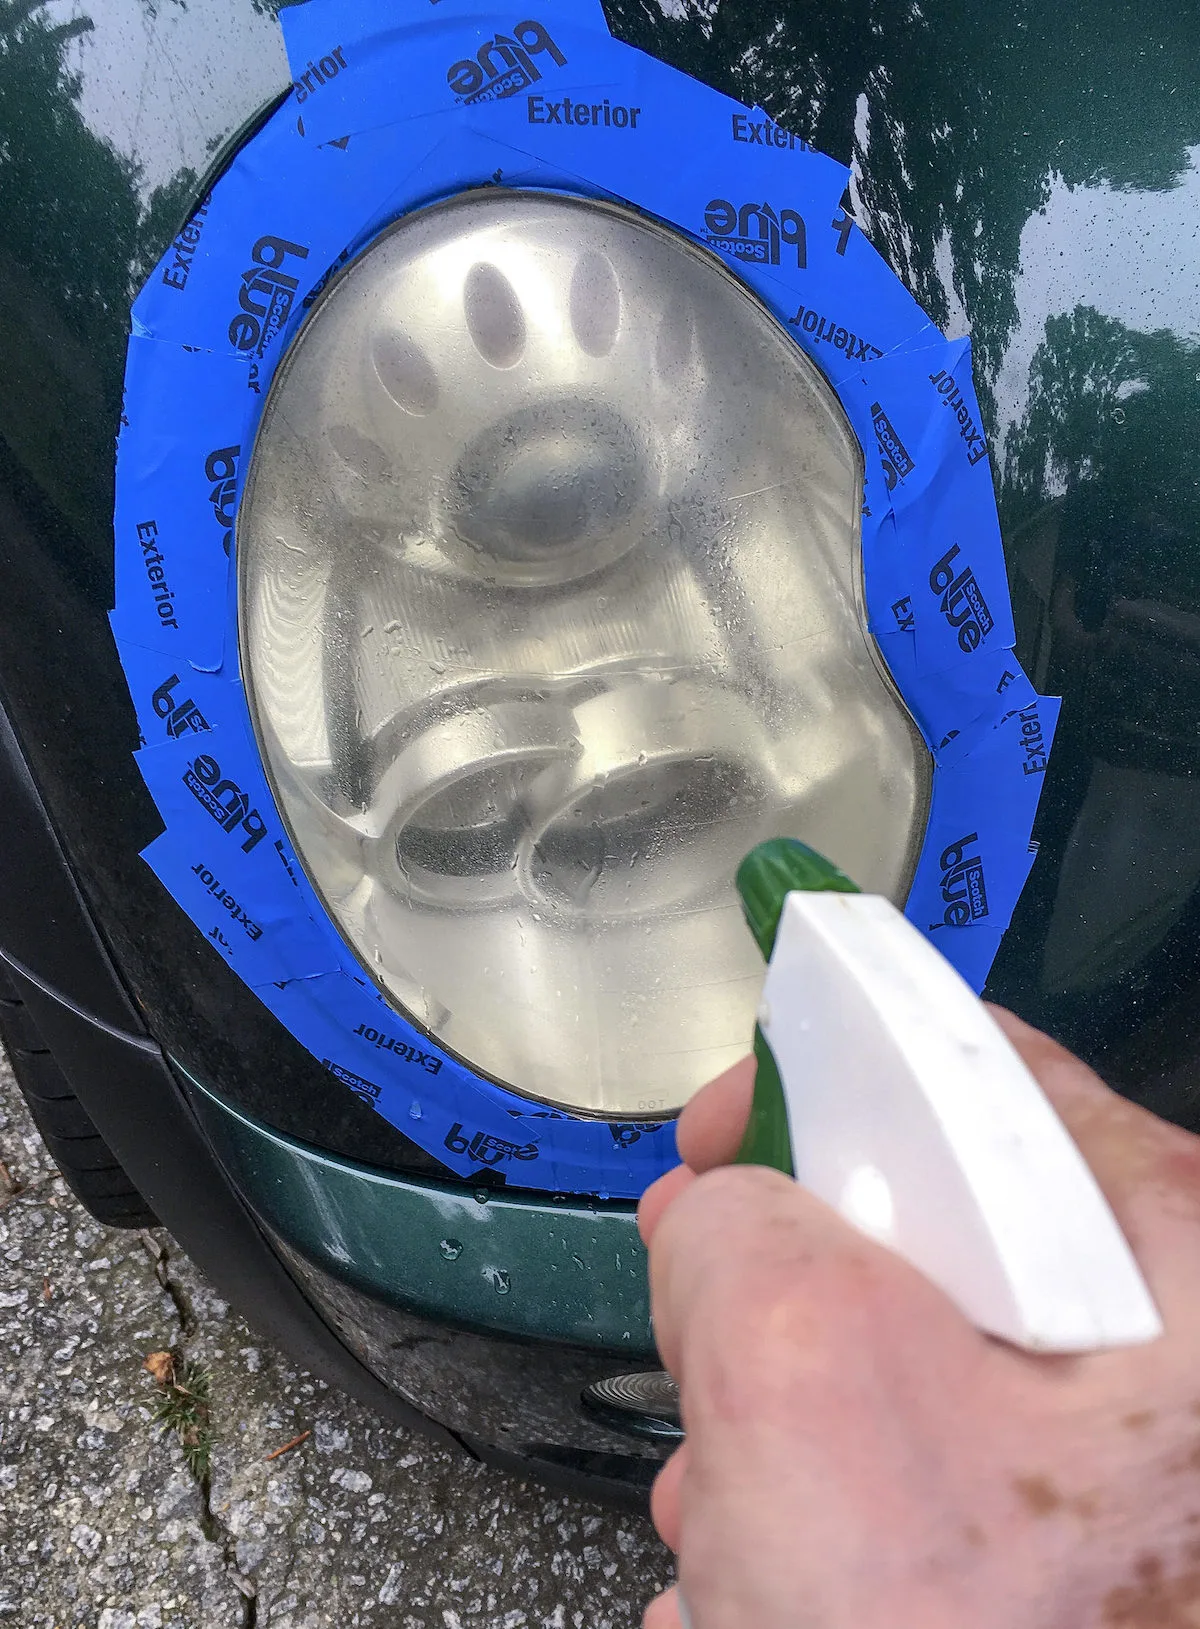 Spraying-water-on-a-taped-off-headlight-with-a-spray-bottle